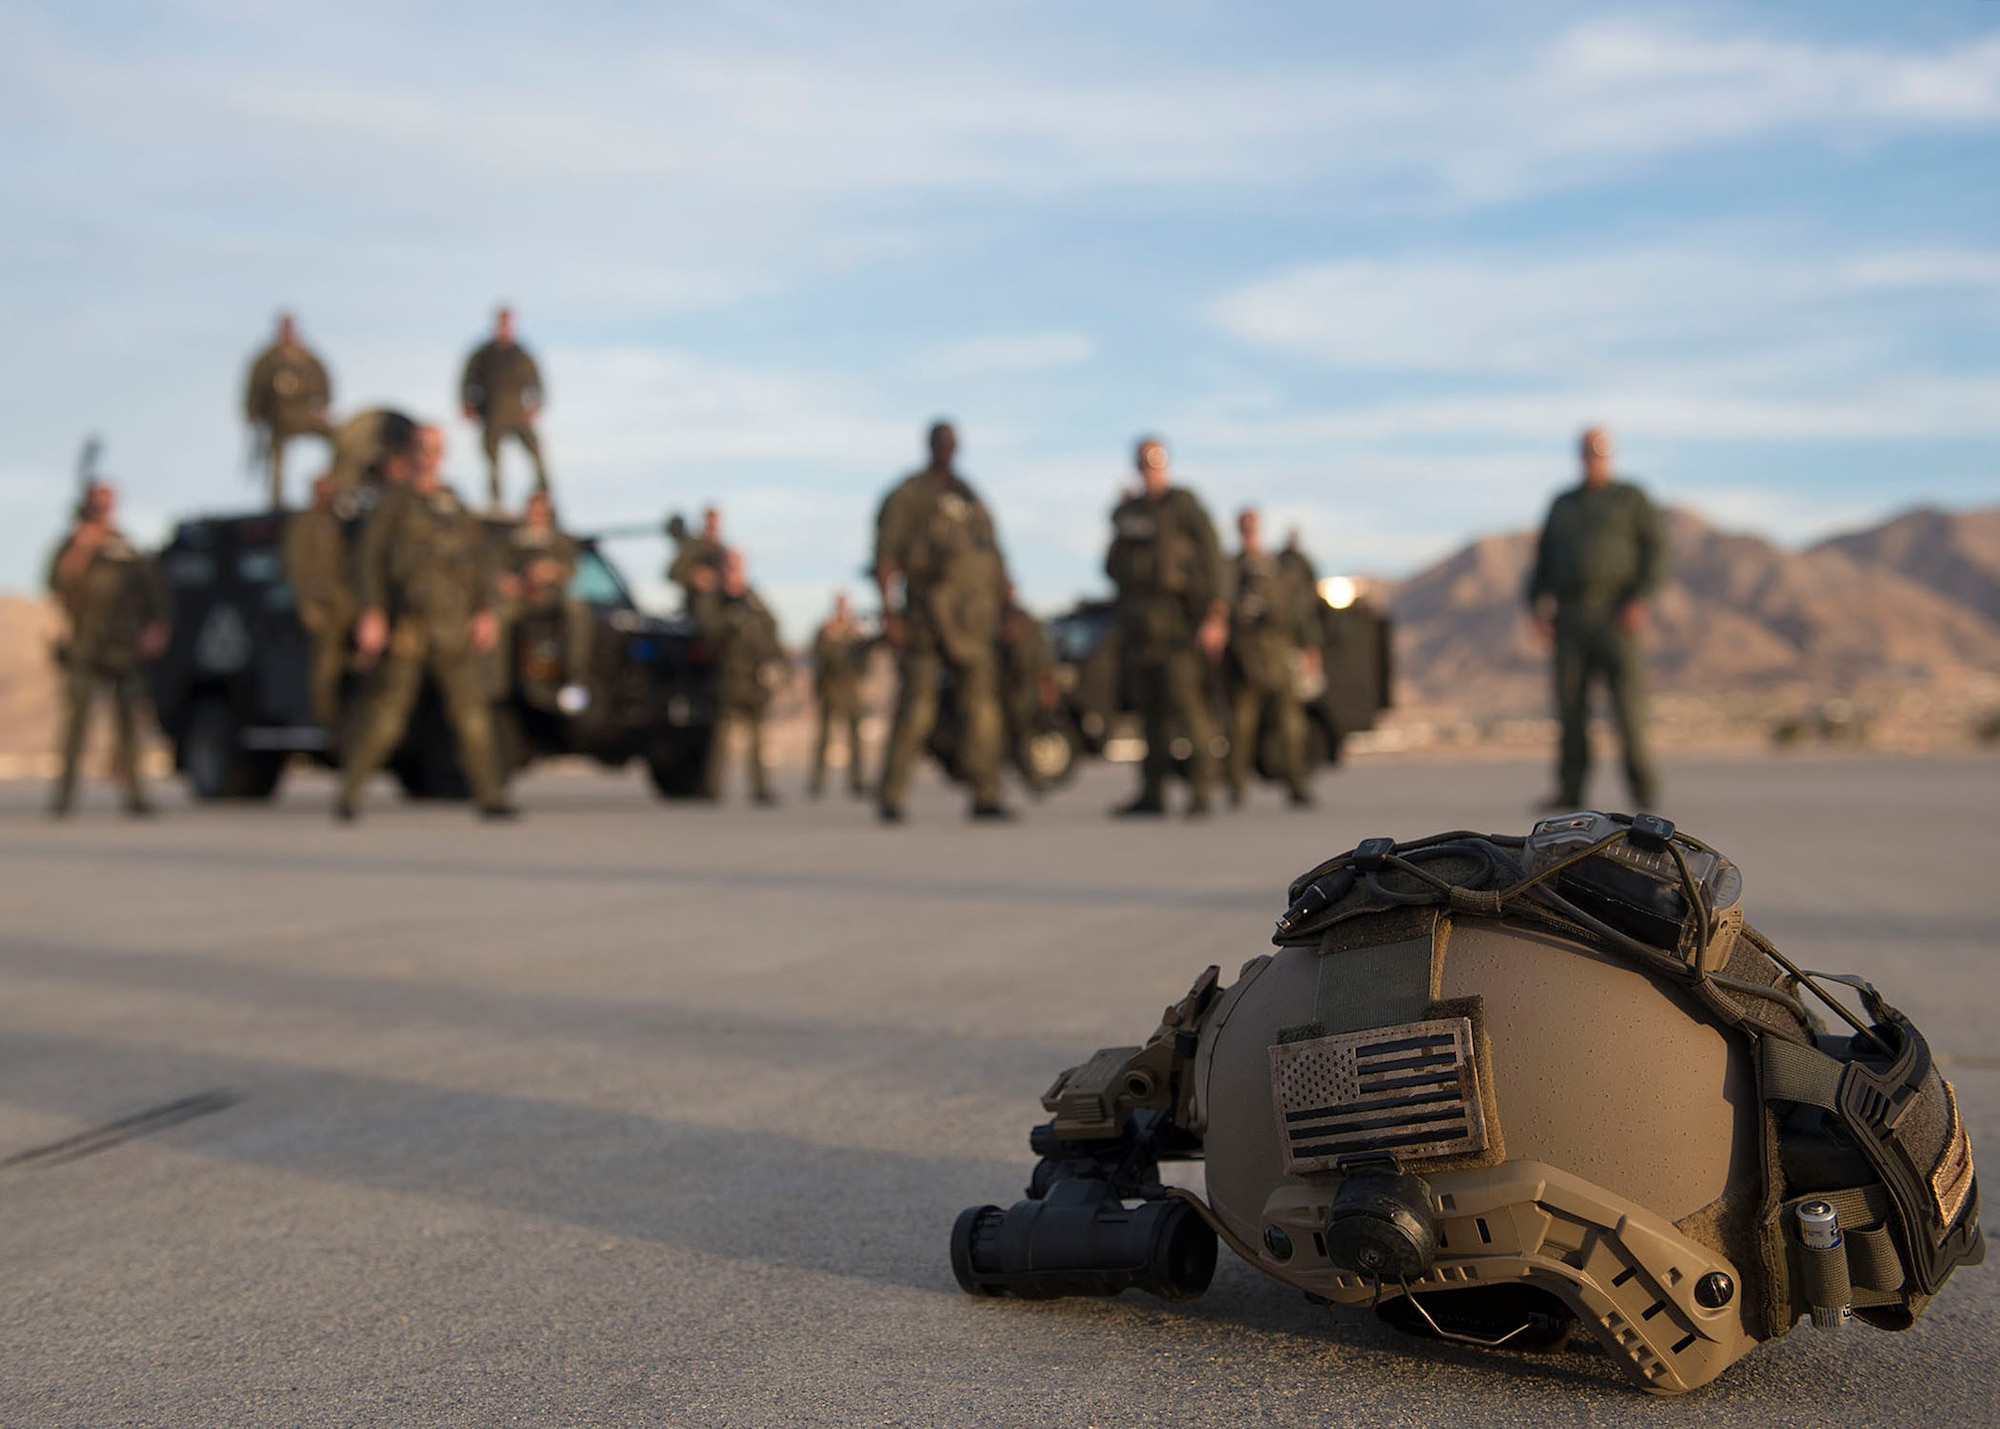 The North Las Vegas Swat team stands on the flightline at Nellis Air Force Base, Nevada, Nov. 2, 2018. This swat team was the unit that breached and cleared Stephen Paddock’s home after the October 1 shooting. (U.S. Air Force photo by Airman 1st Class Bryan T. Guthrie)